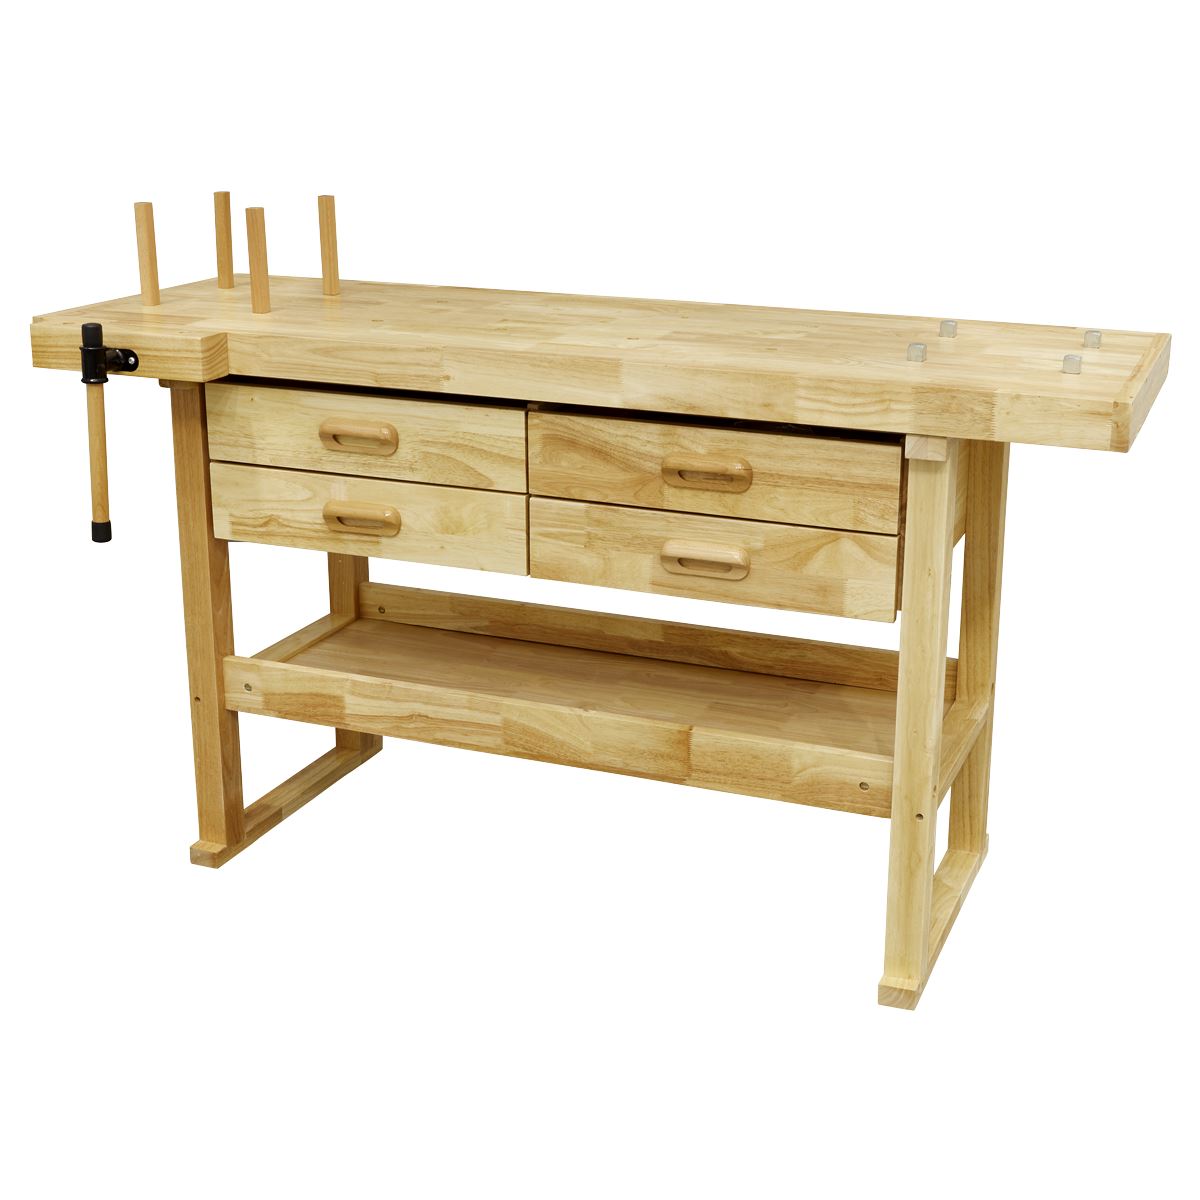 Sealey Woodworking Bench with 4 Drawers